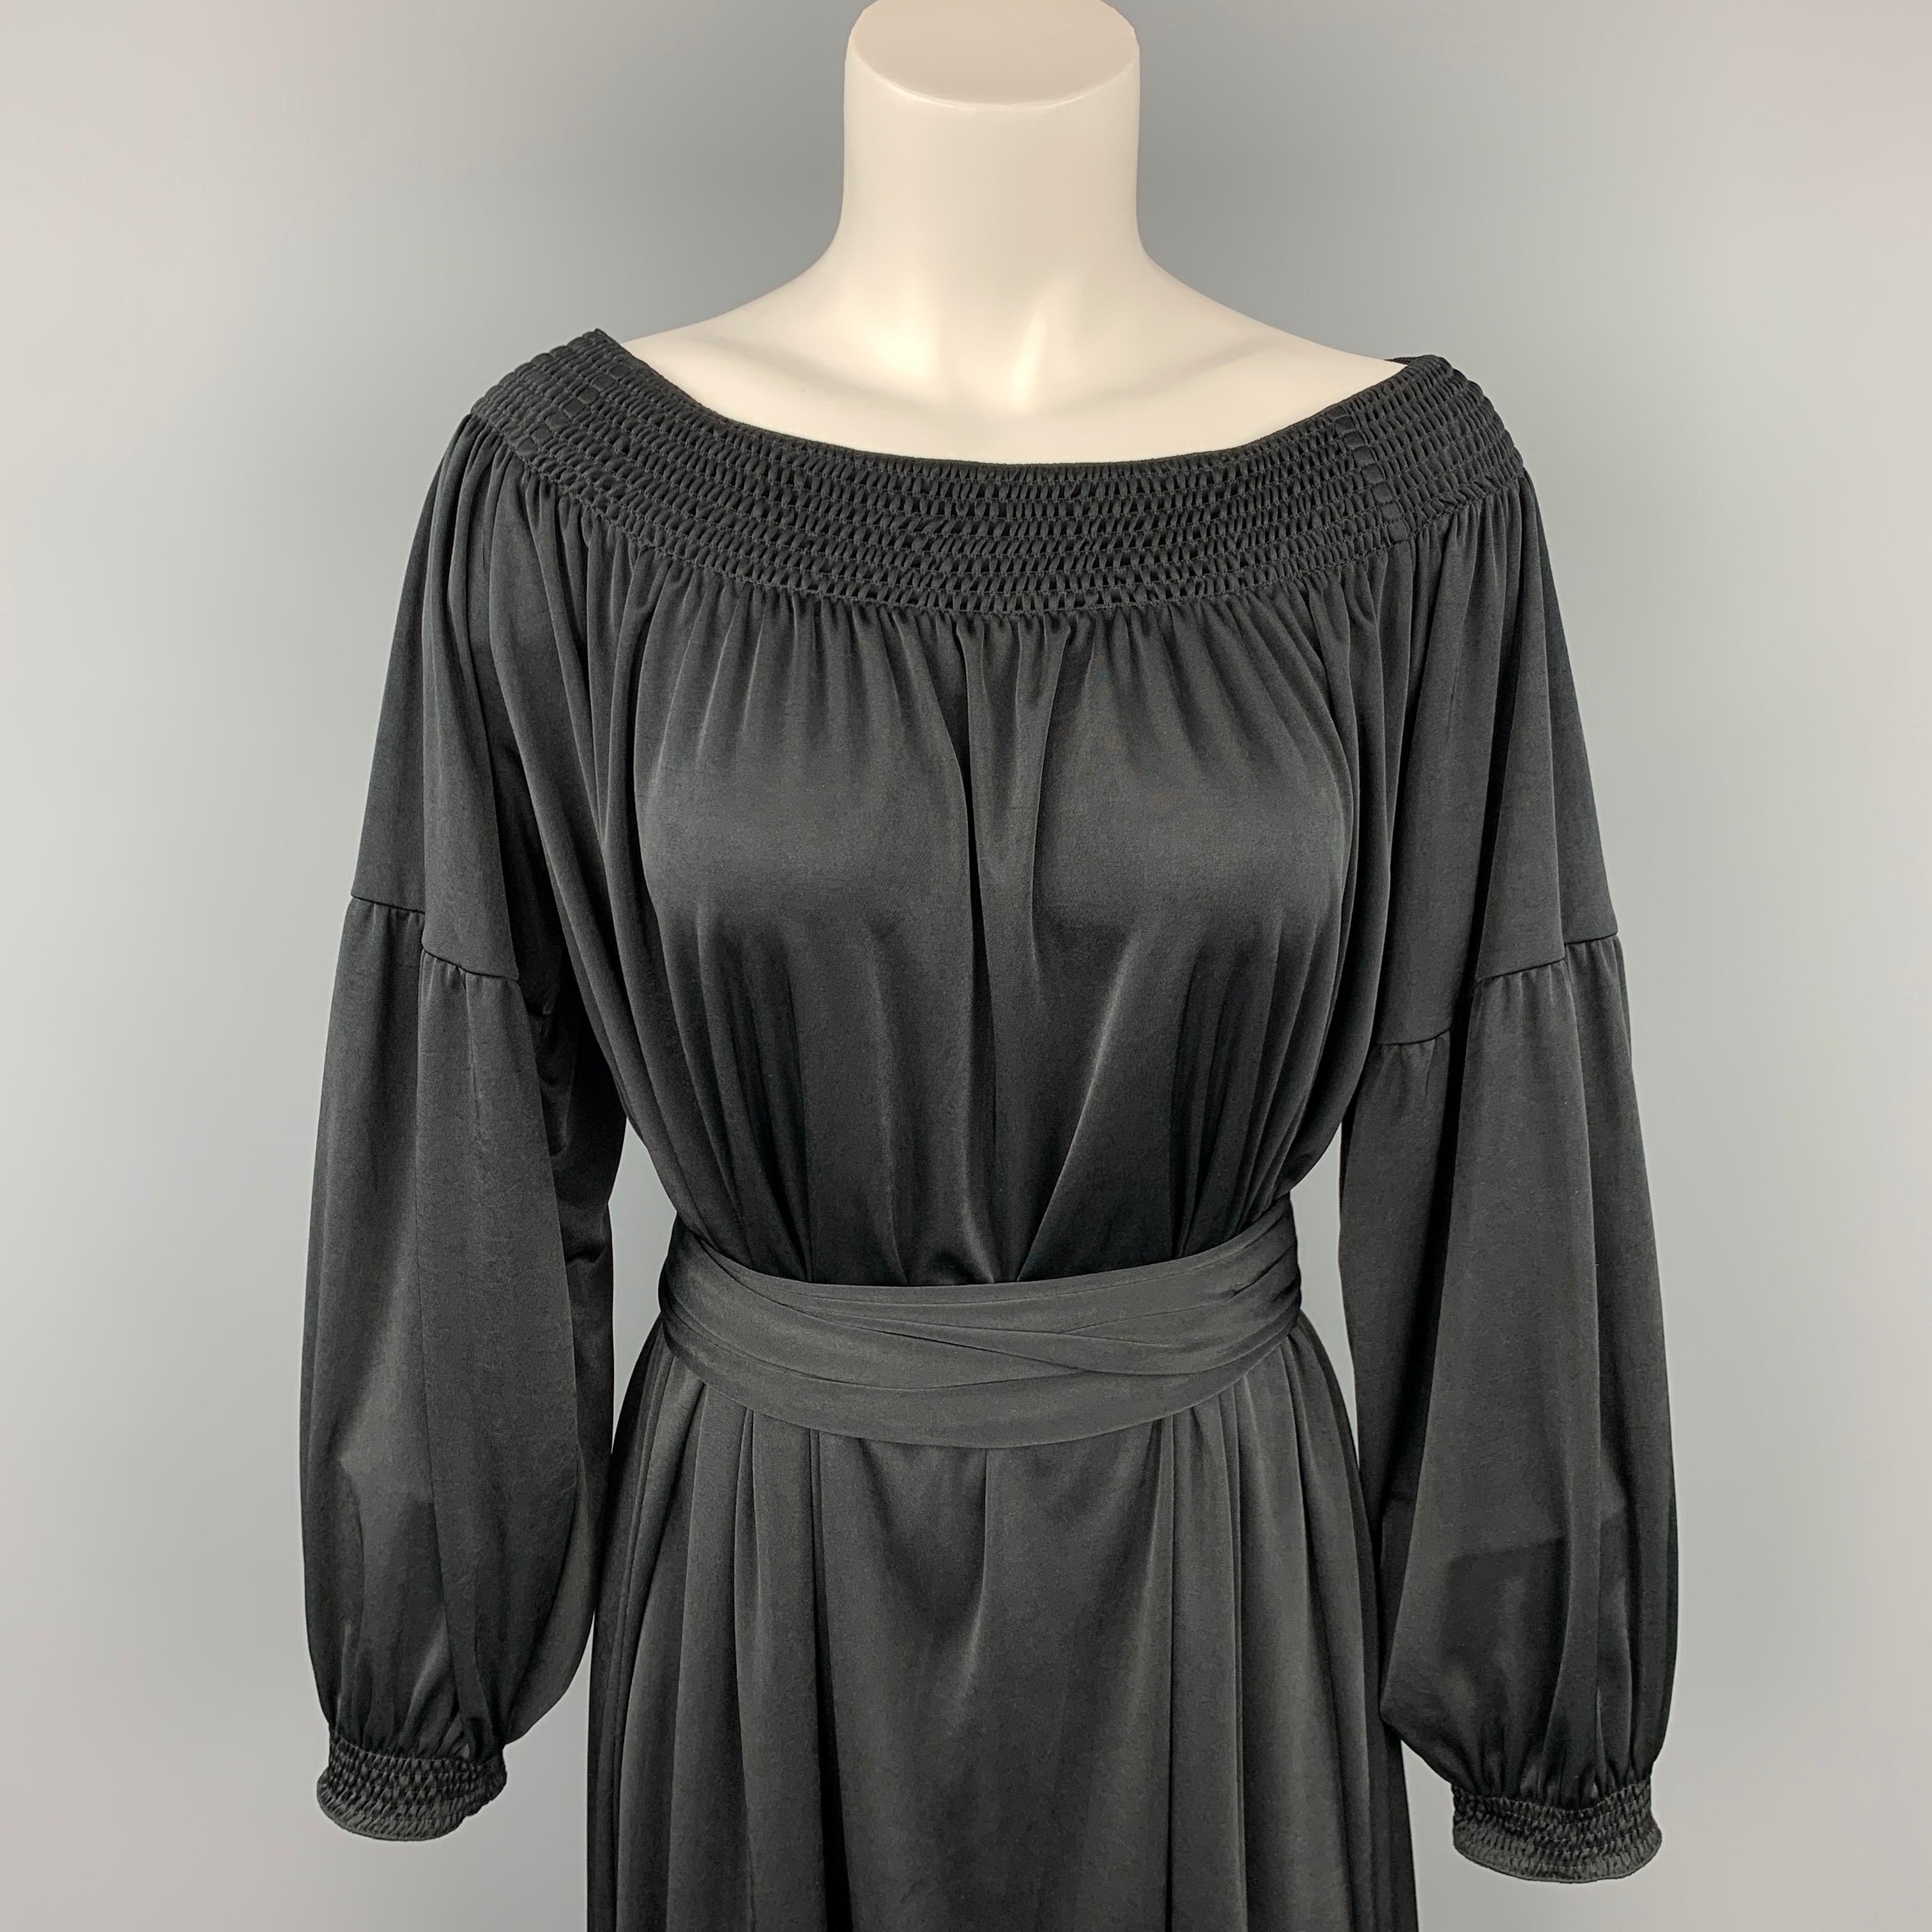 PRADA dress comes in a black jersey polyester featuring a bohemian style, belted, and 3/4 sleeves. Made in Italy.

Very Good Pre-Owned Condition.
Marked: S

Measurements:

Shoulder: 17 in.
Bust: 42 in.
Hip: 58 in.
Sleeve: 14.5 in.
Length: 37 in. 